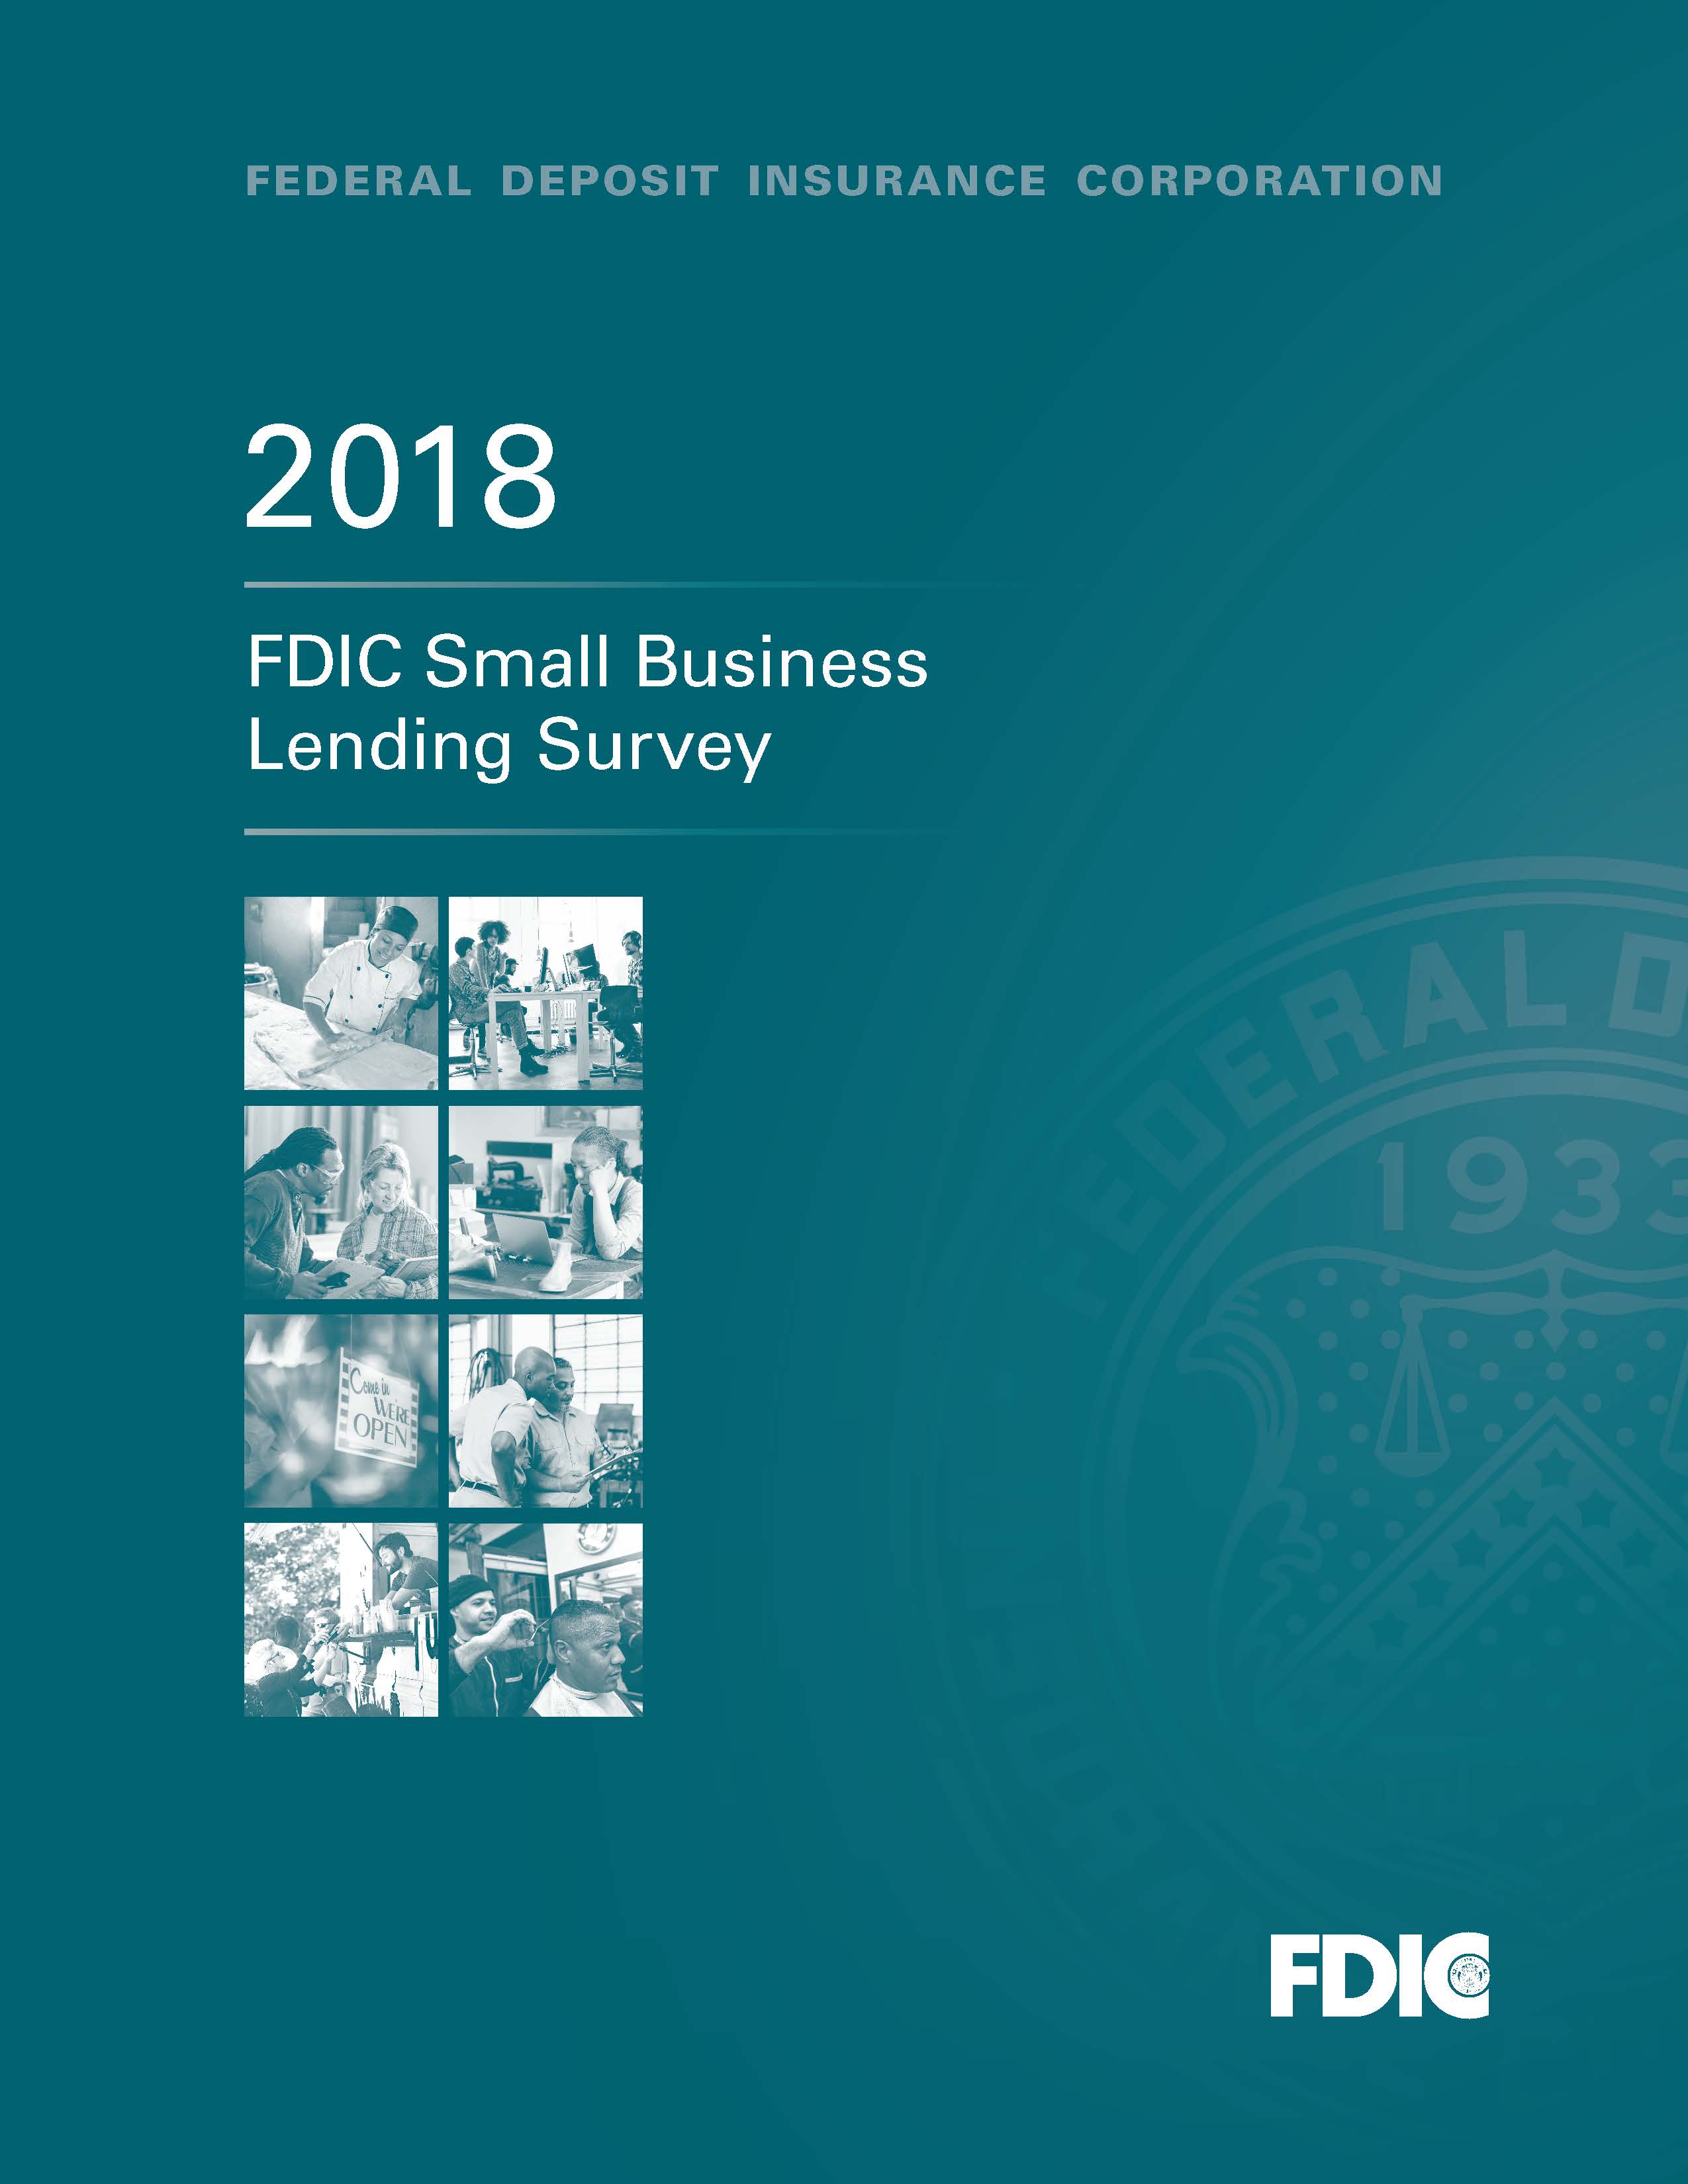 Report of Main Findings from Small Business Lending Survey 2016 (FDIC 2018) Cover